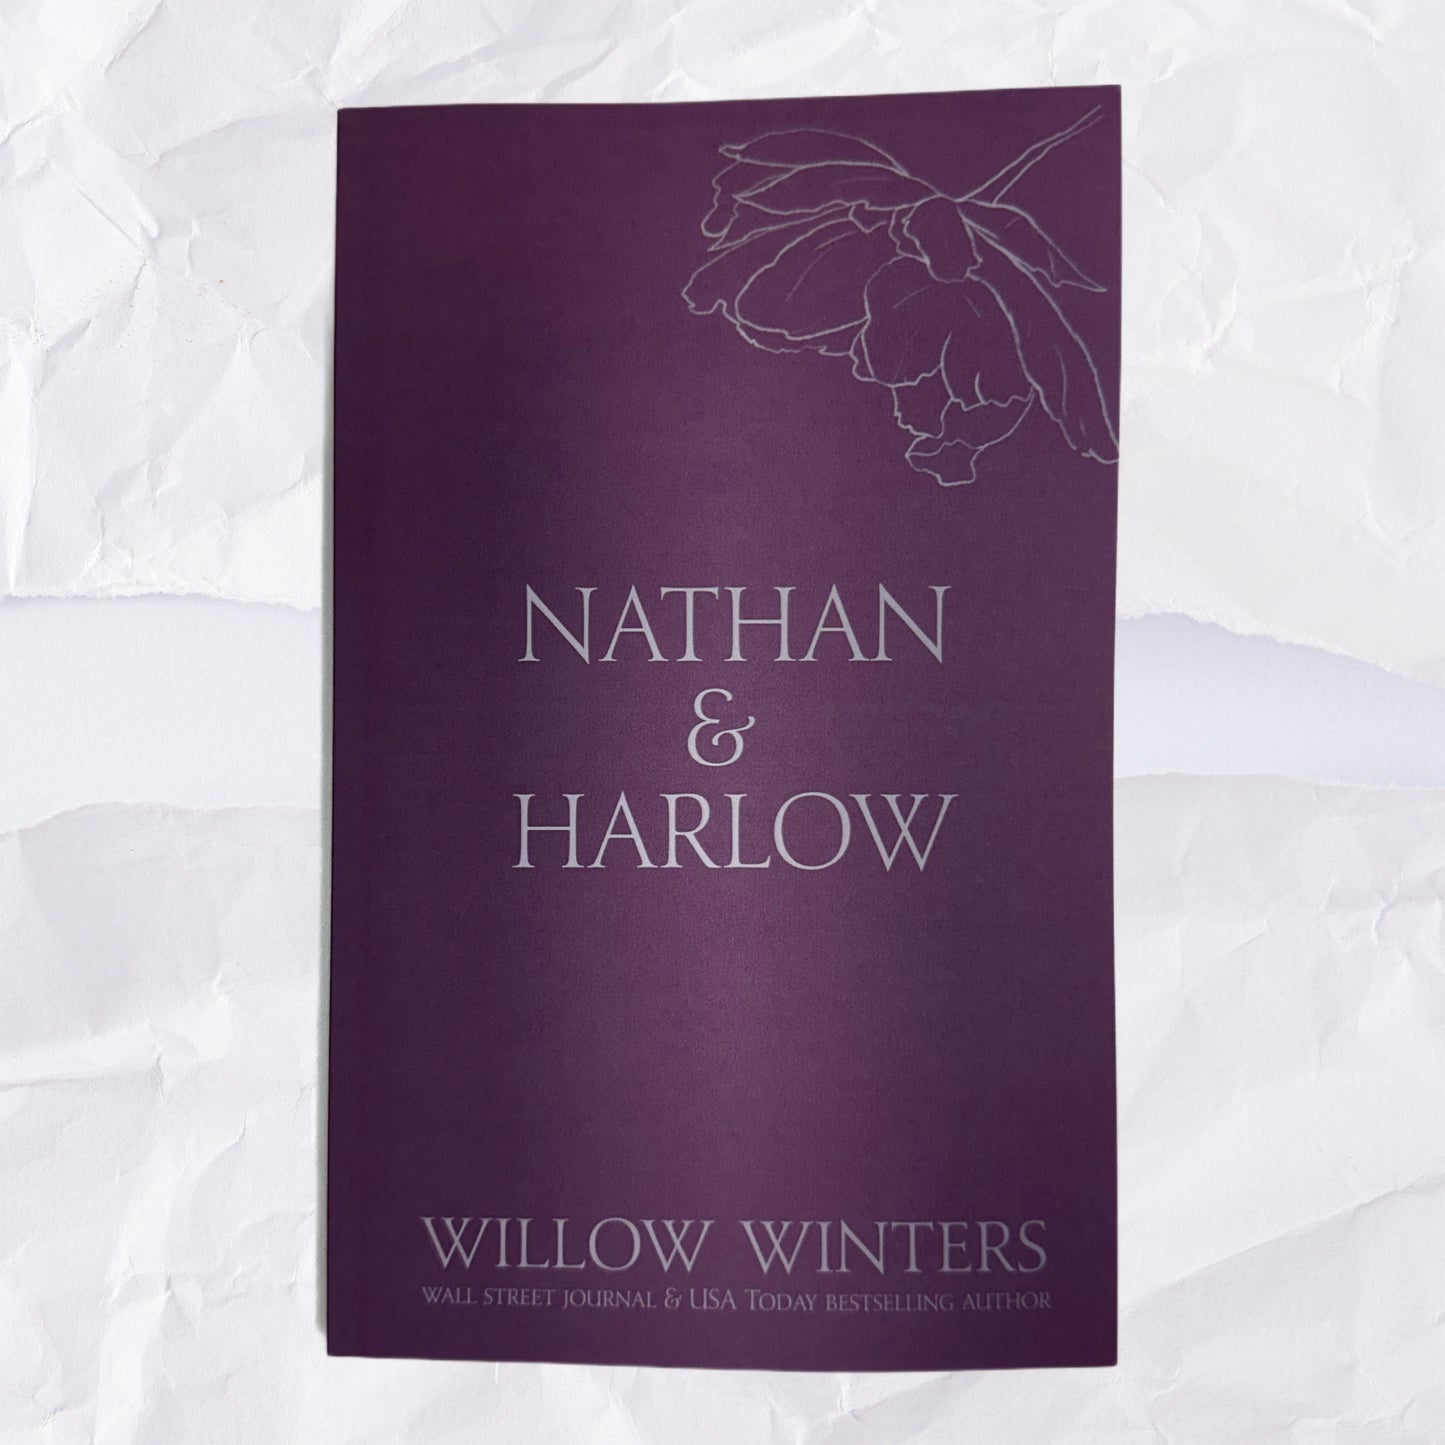 16) Nathan & Harlow: Discreet Series by Willow Winters